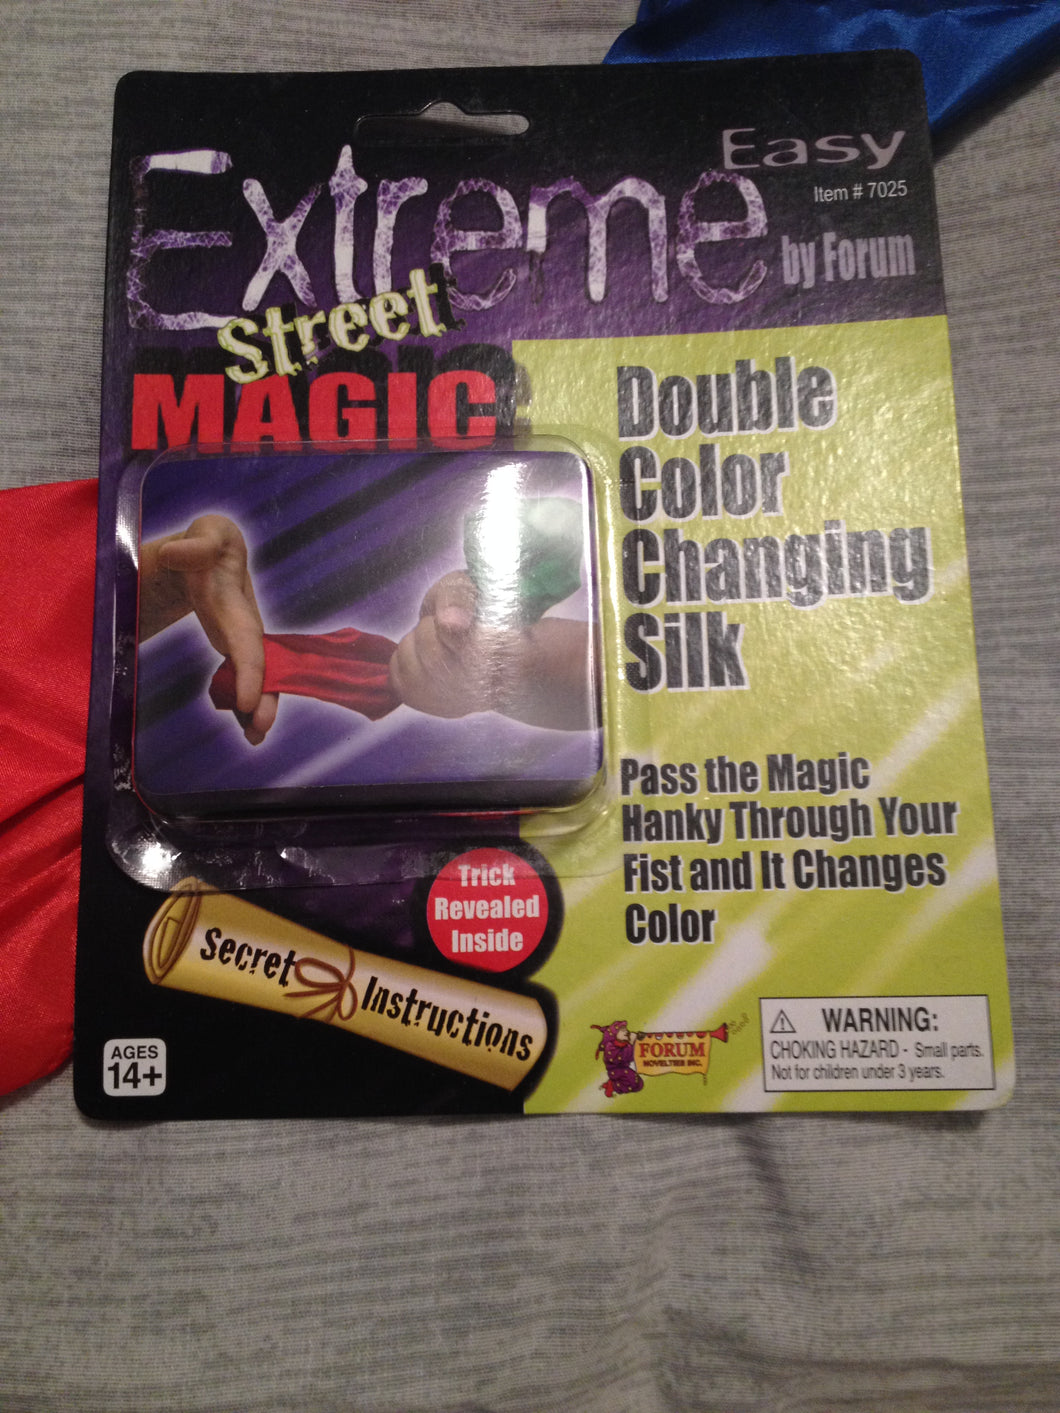 Double Color Changing Silks - Two Silks Change Color! - by Forum - Easy to Do!